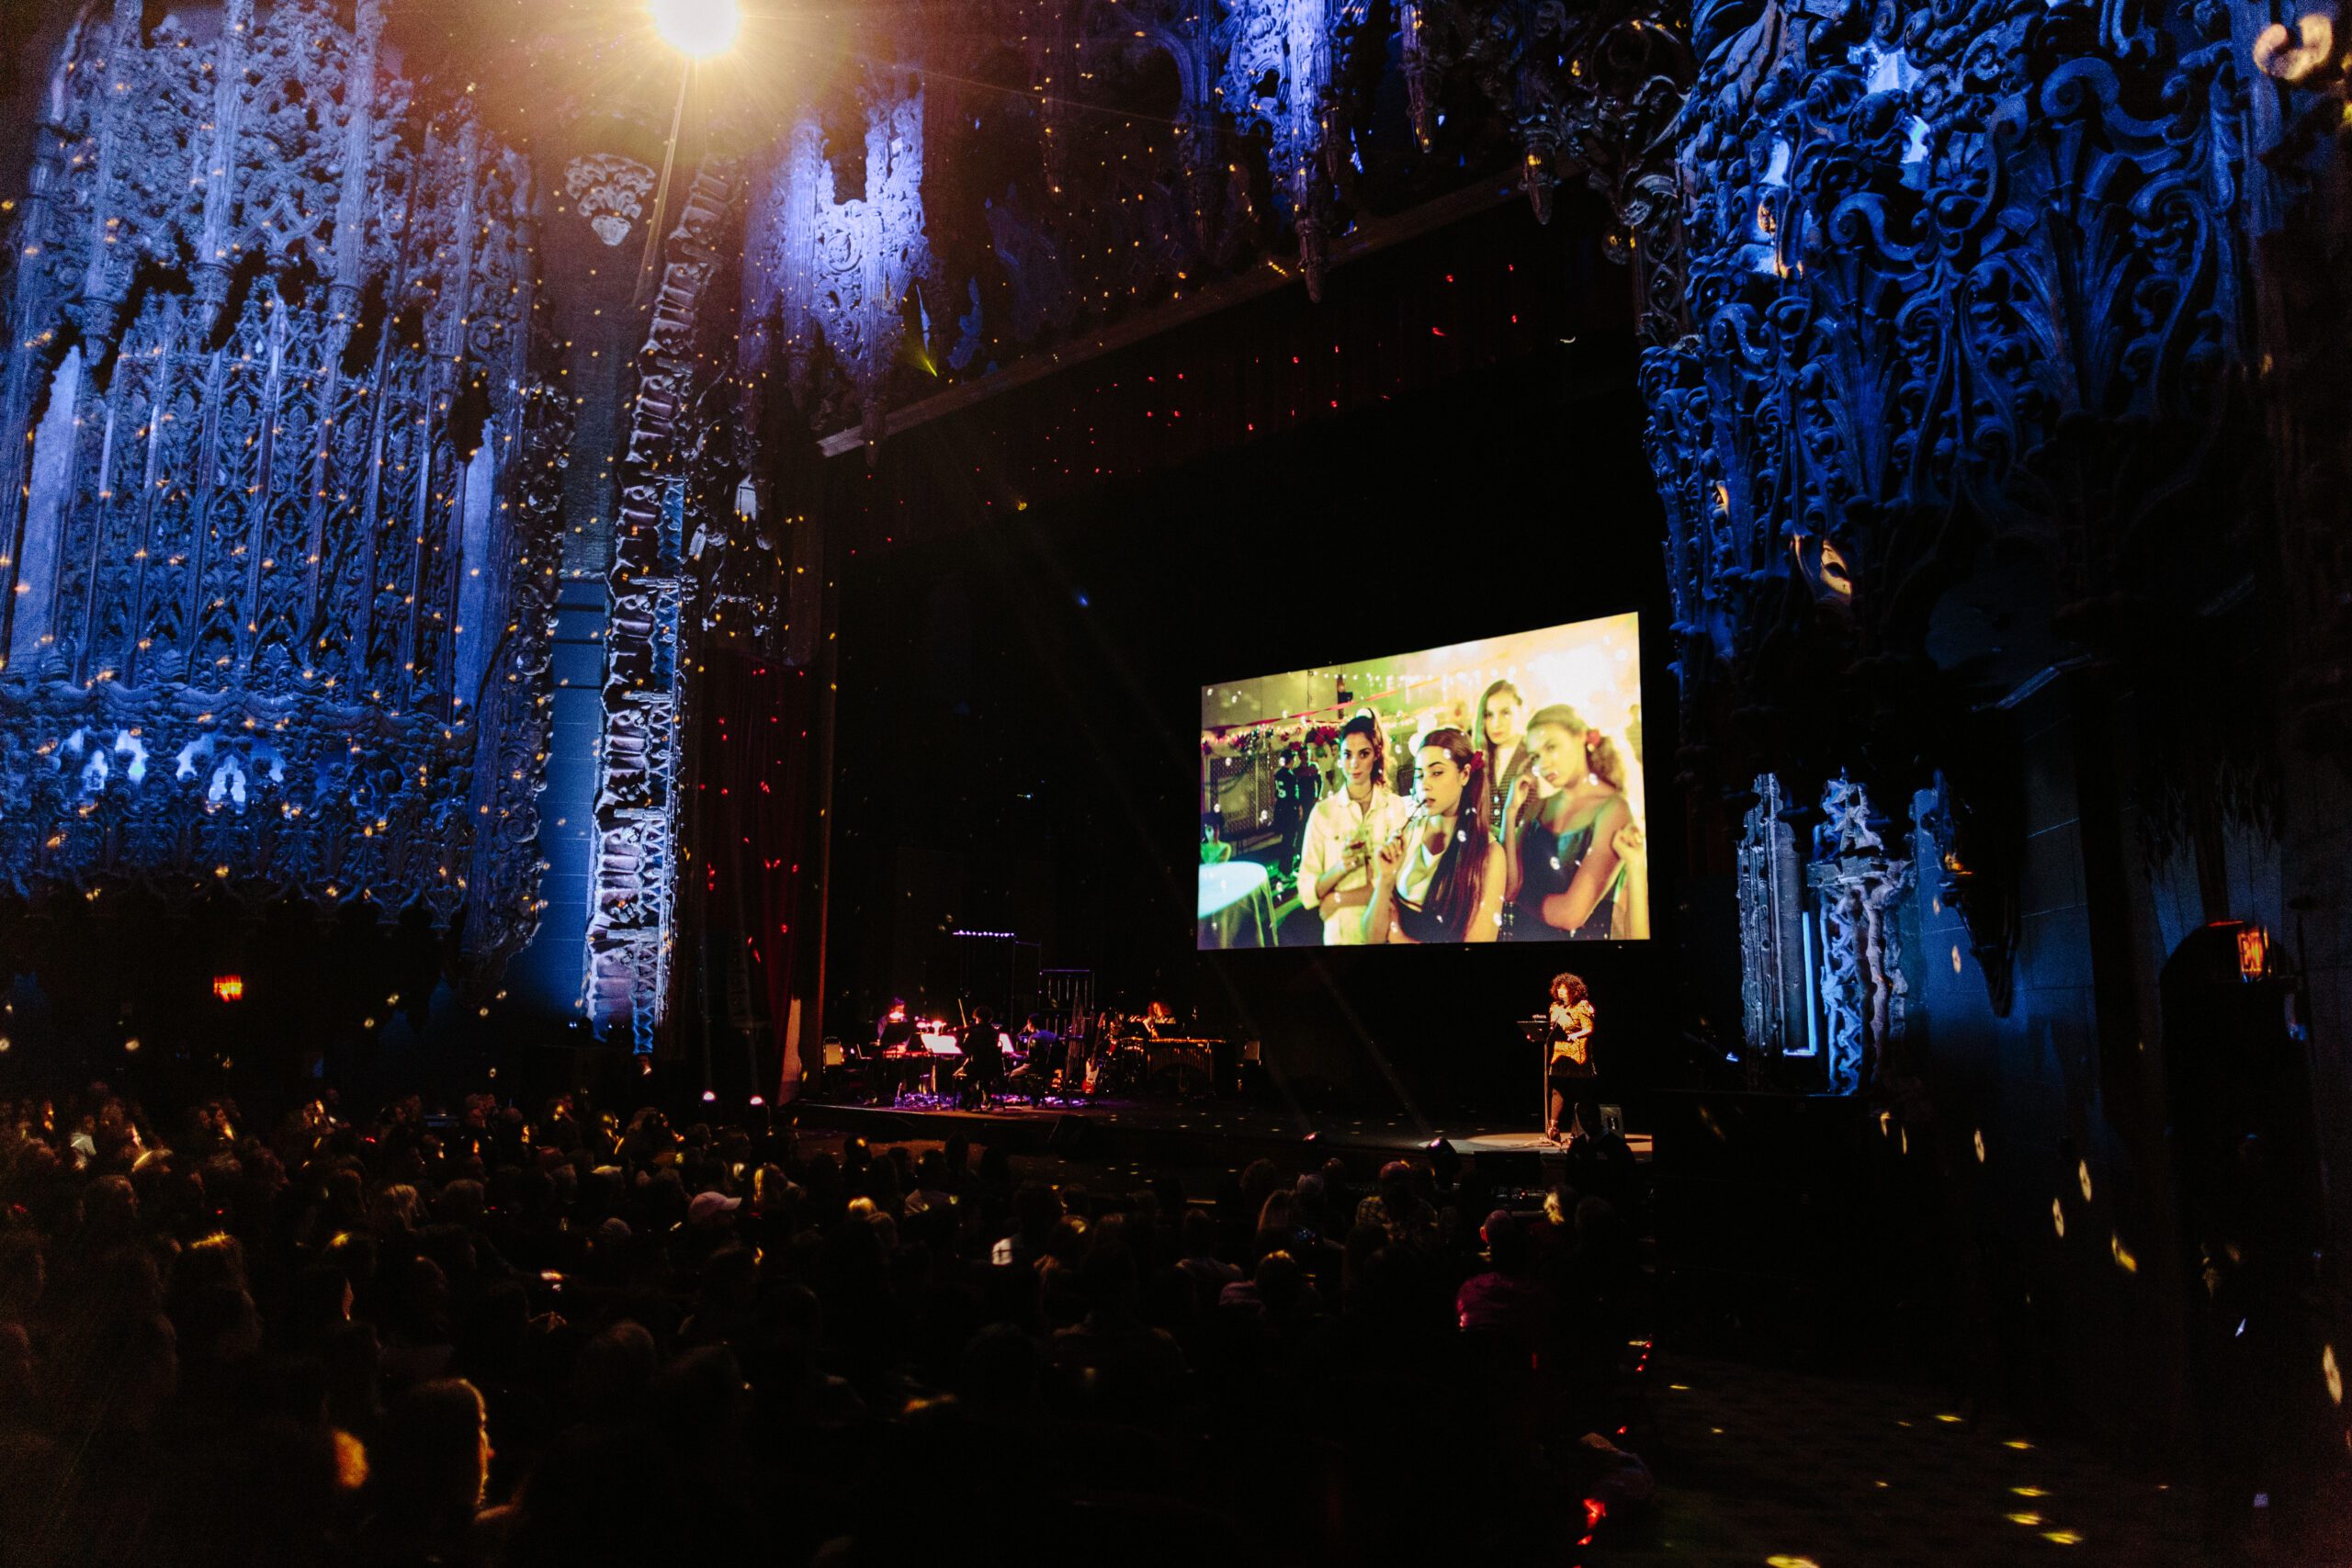 Image of Pop-Up Magazine at The Theatre at Ace Hotel in Los Angeles, CA. In the center of the image you see an image projected on the screen, a person standing on a podium on the right side of the stage, with blue and purple lights on the proscenium.